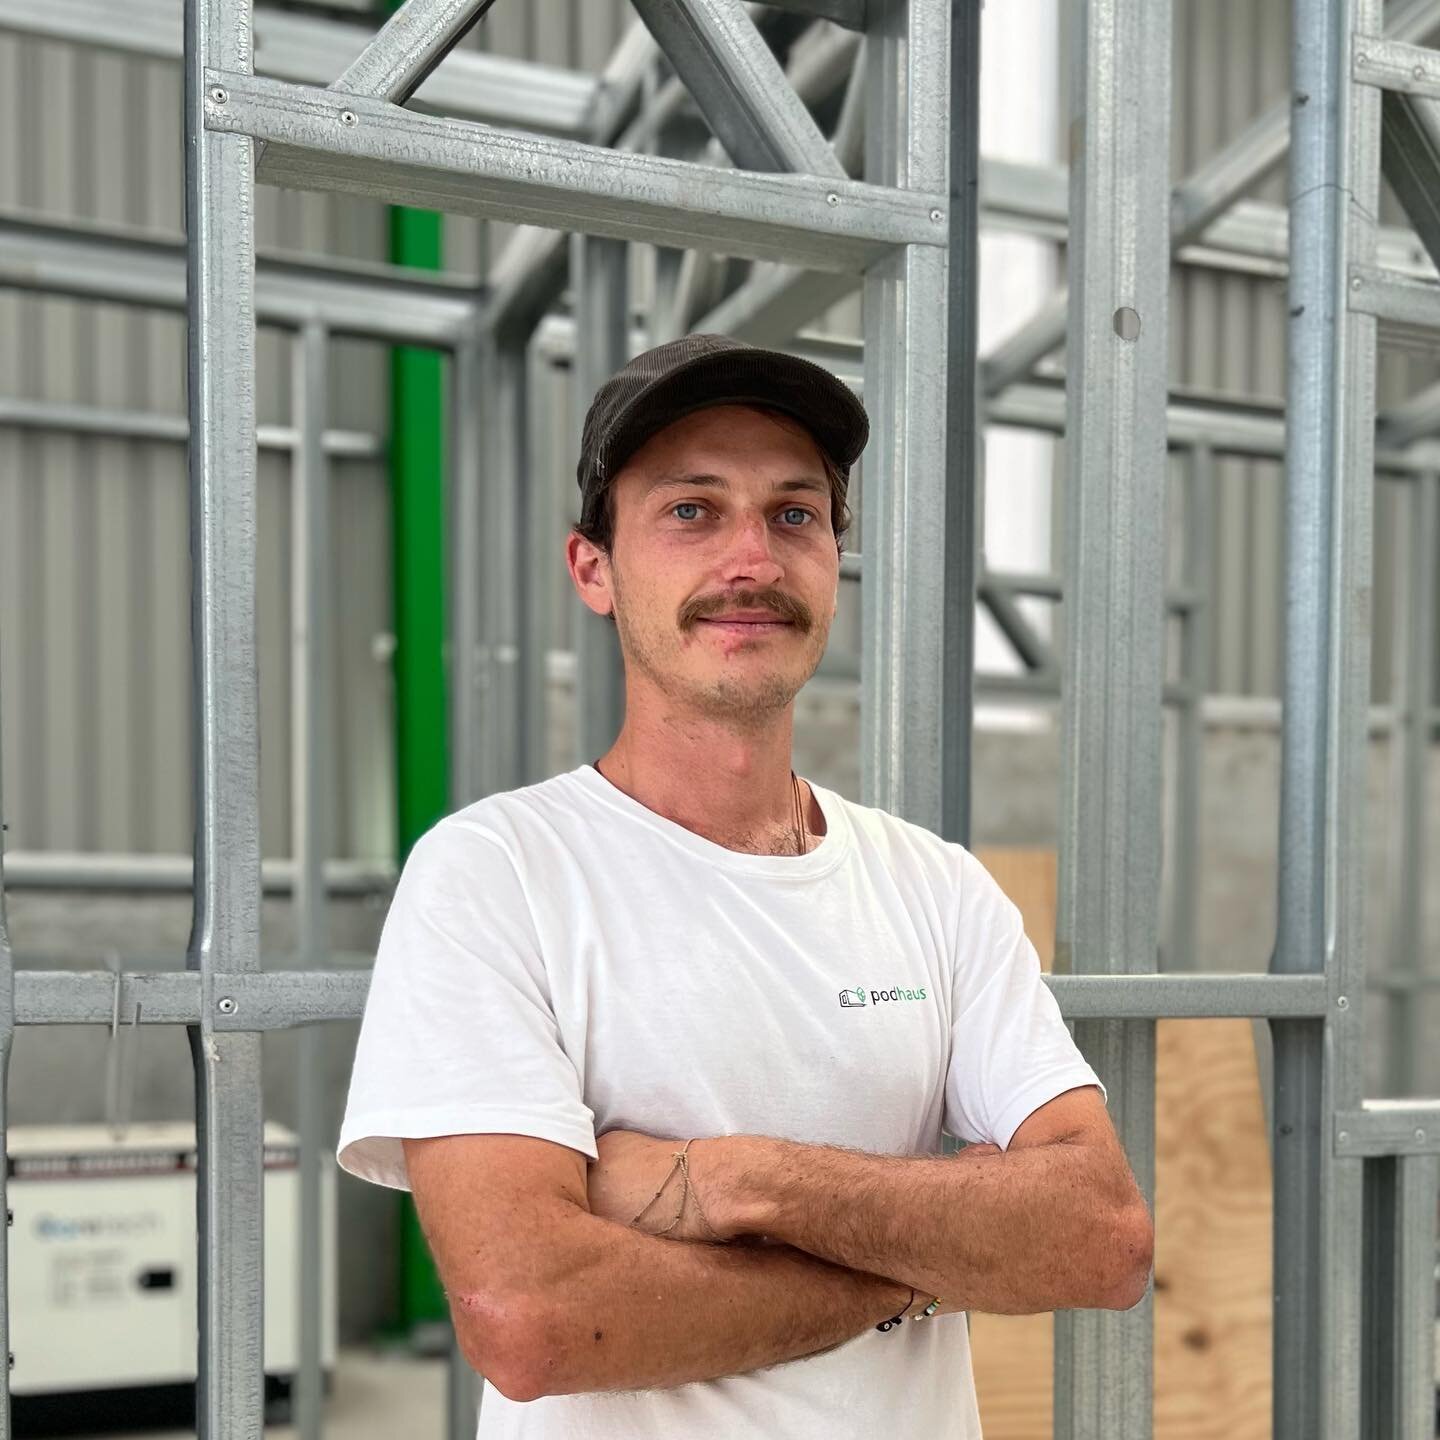 Time to get to know Podhaus a little better! 

Meet Tristan, director and founder.

Intrigued by van conversions and captivated by tiny home concepts, Tristan embarked on a transformative journey. His vision took shape as he crafted the inaugural con